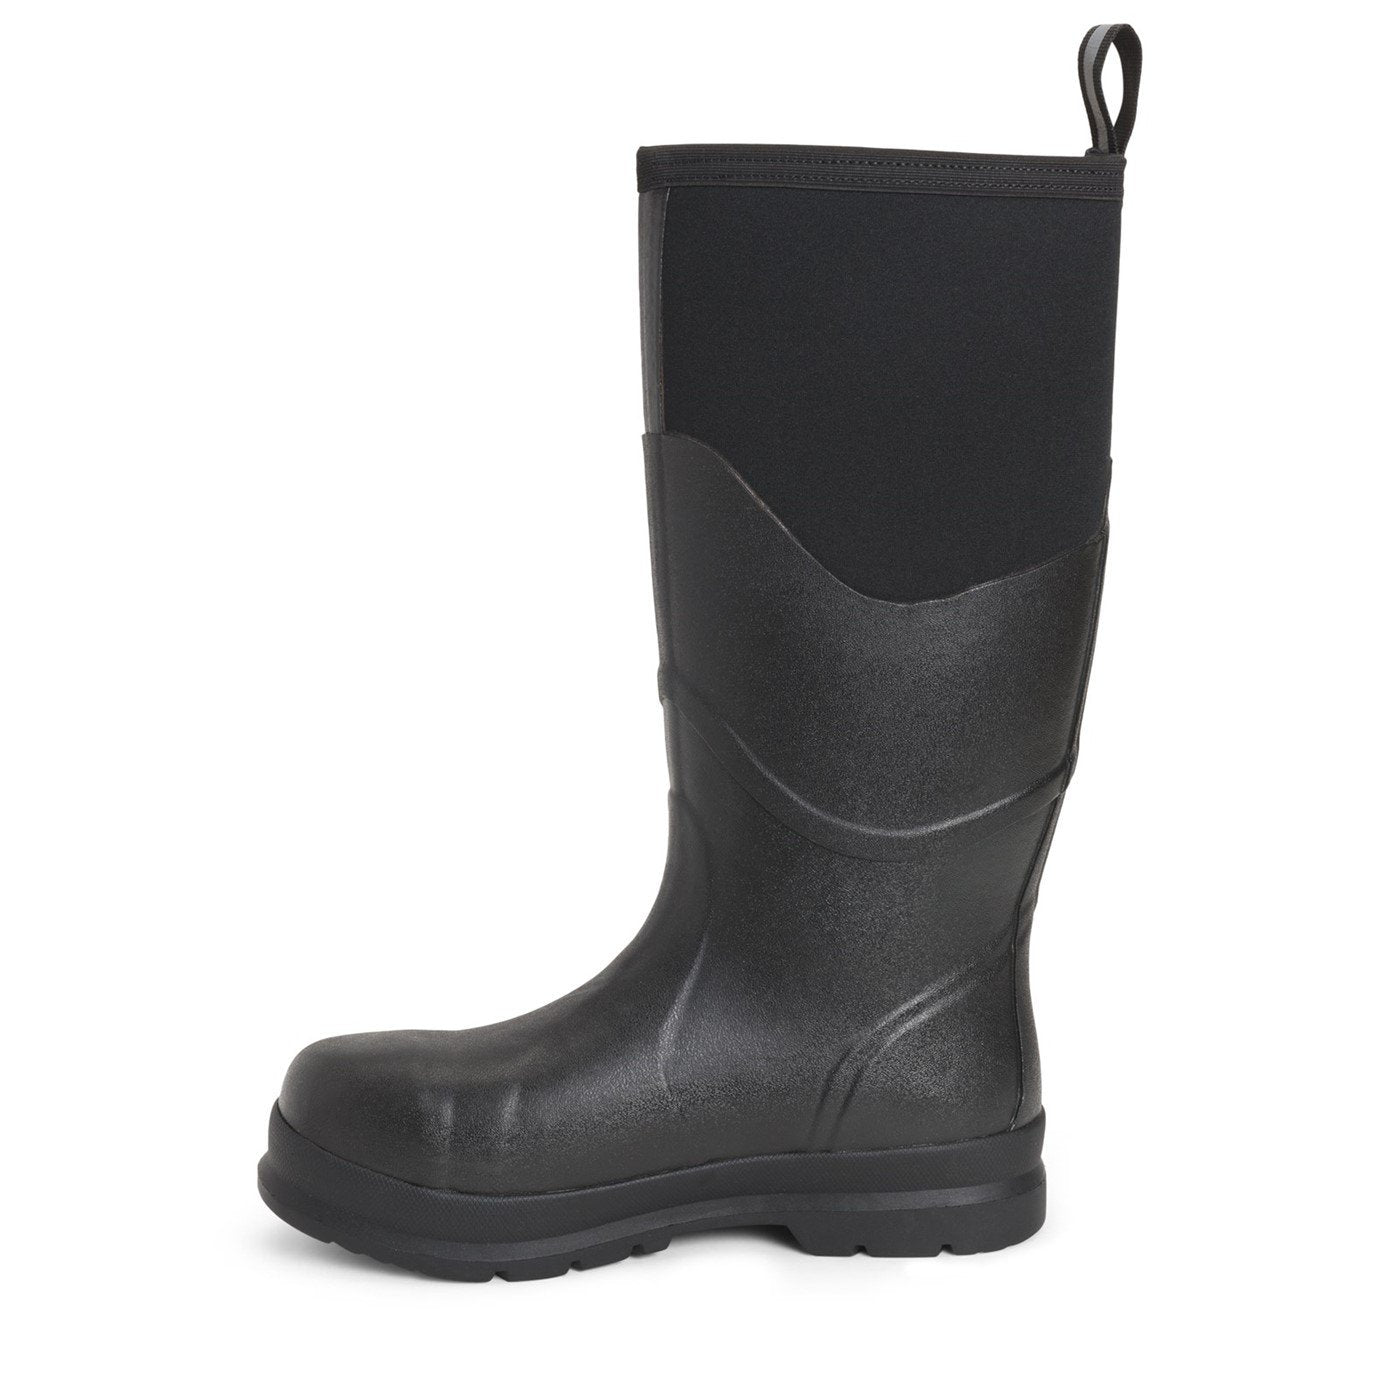 Muck Boots Chore Max S5 Boots